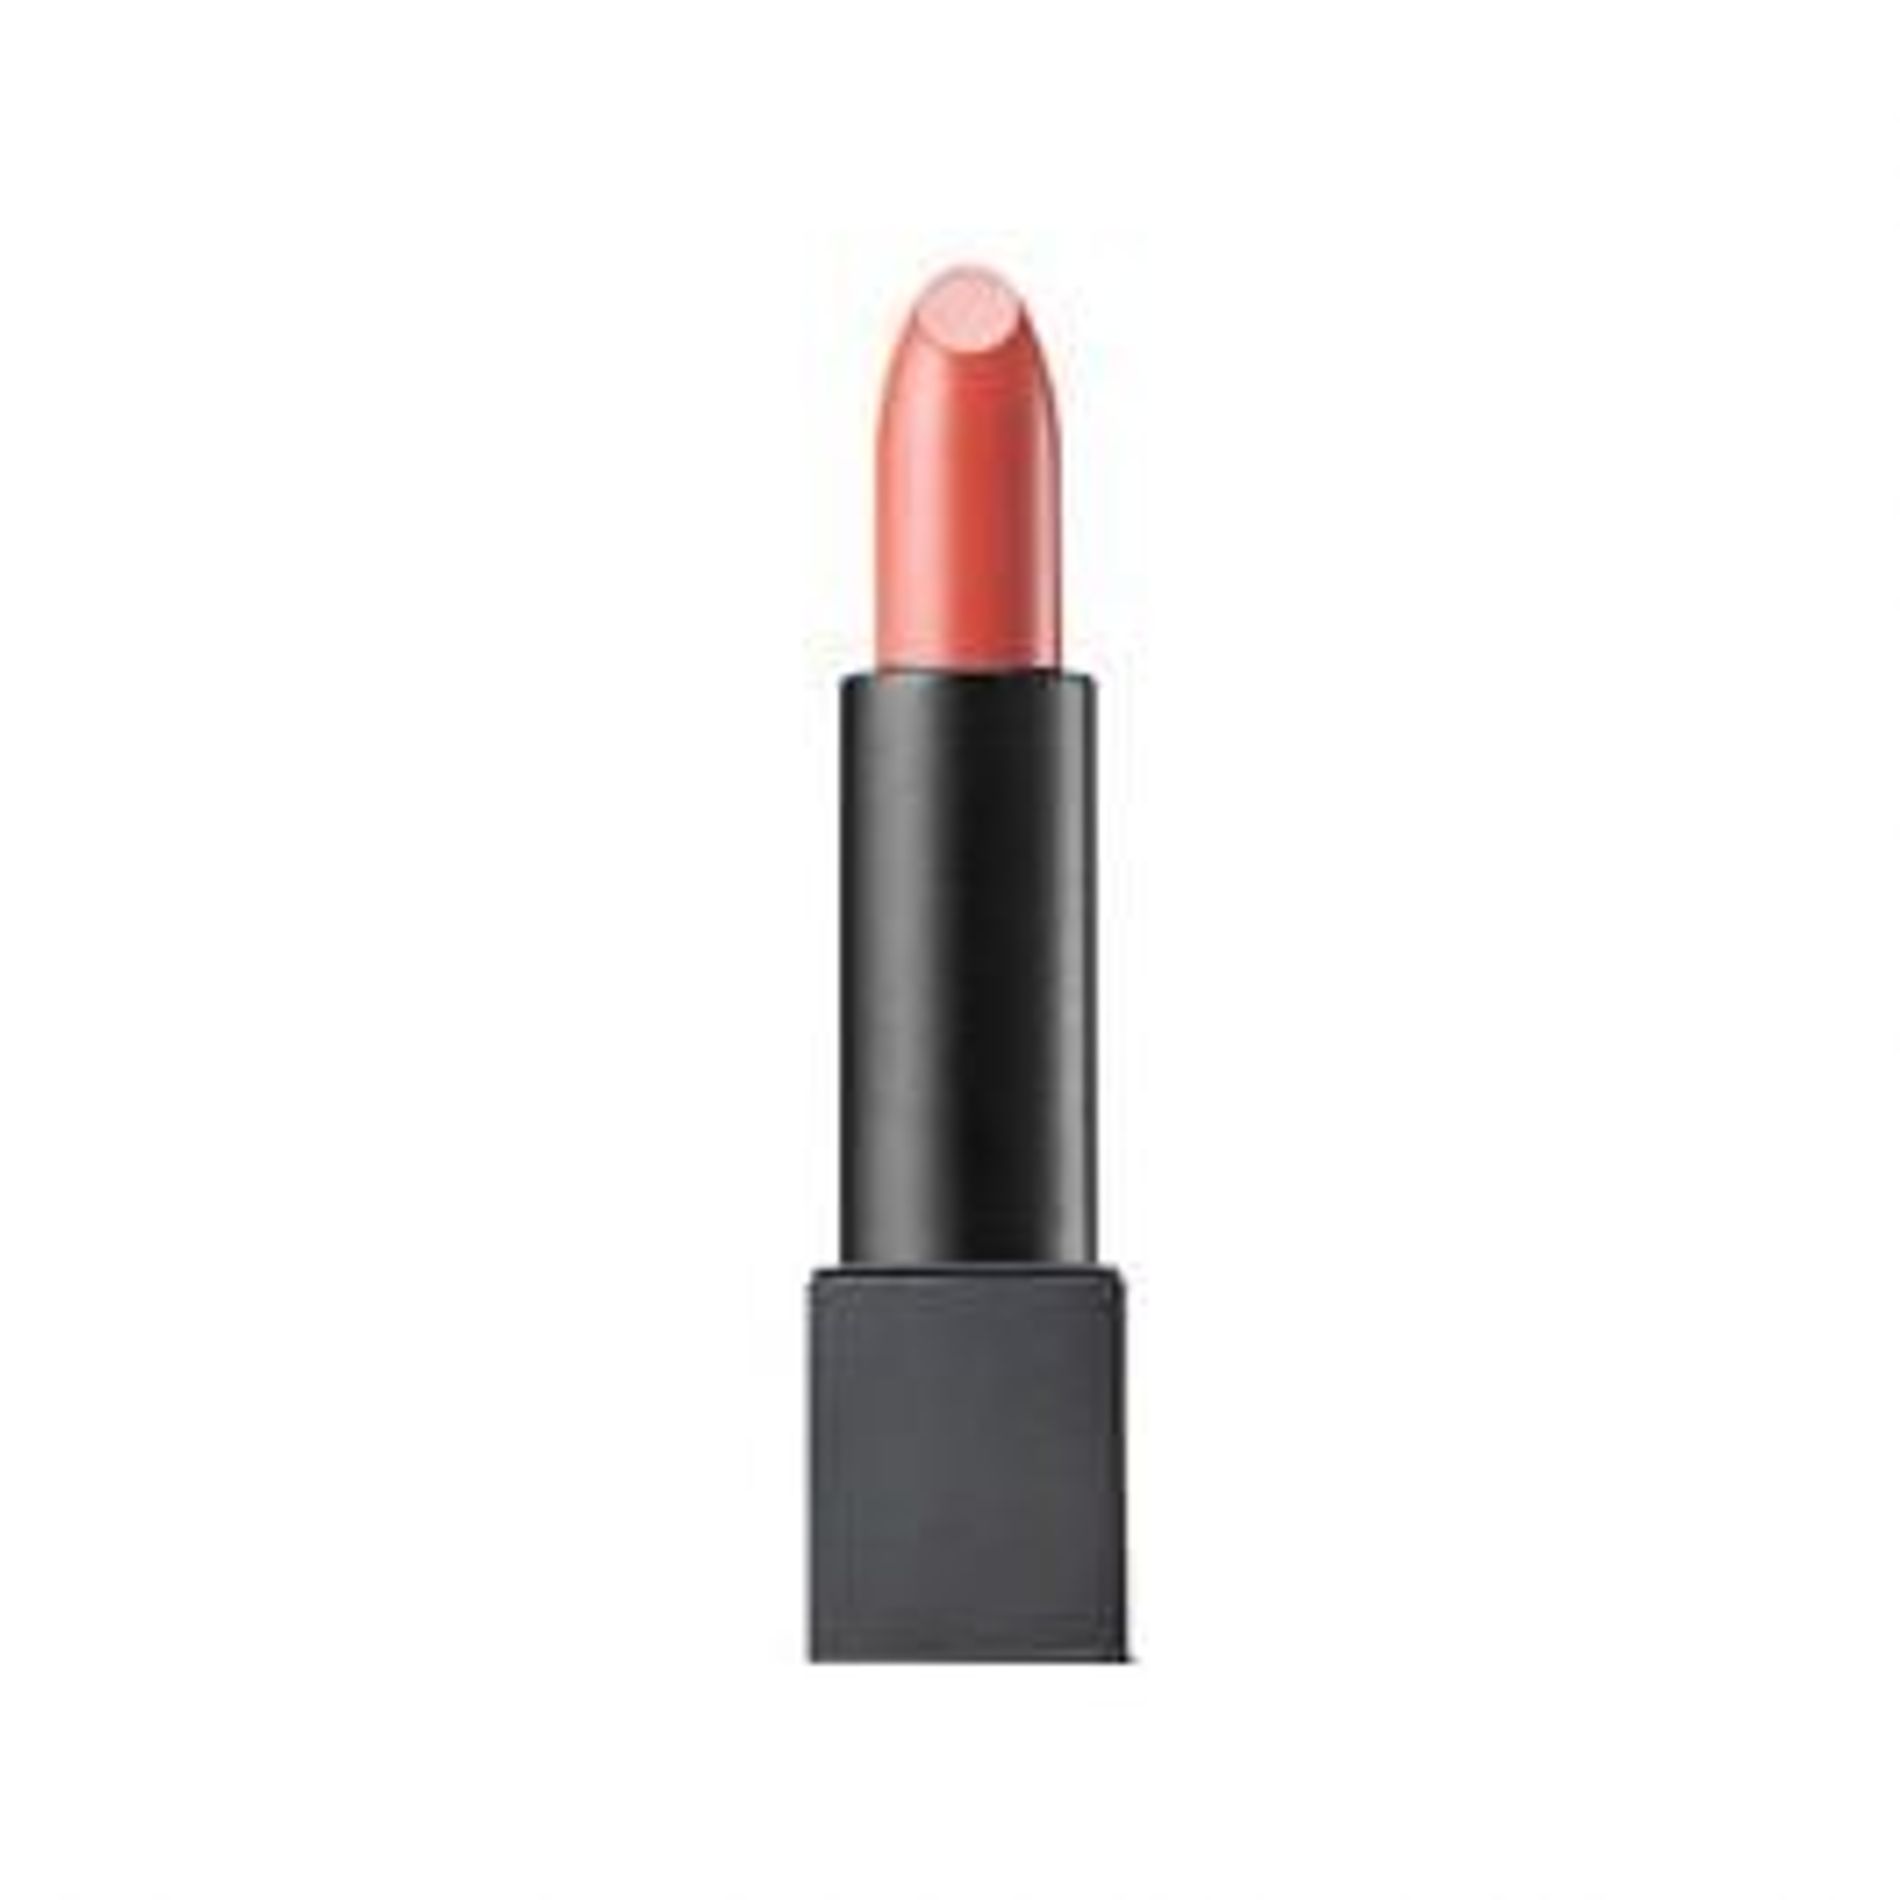 son-thoi-giverny-slip-melting-louge-05-sensual-coral-3-5g-2